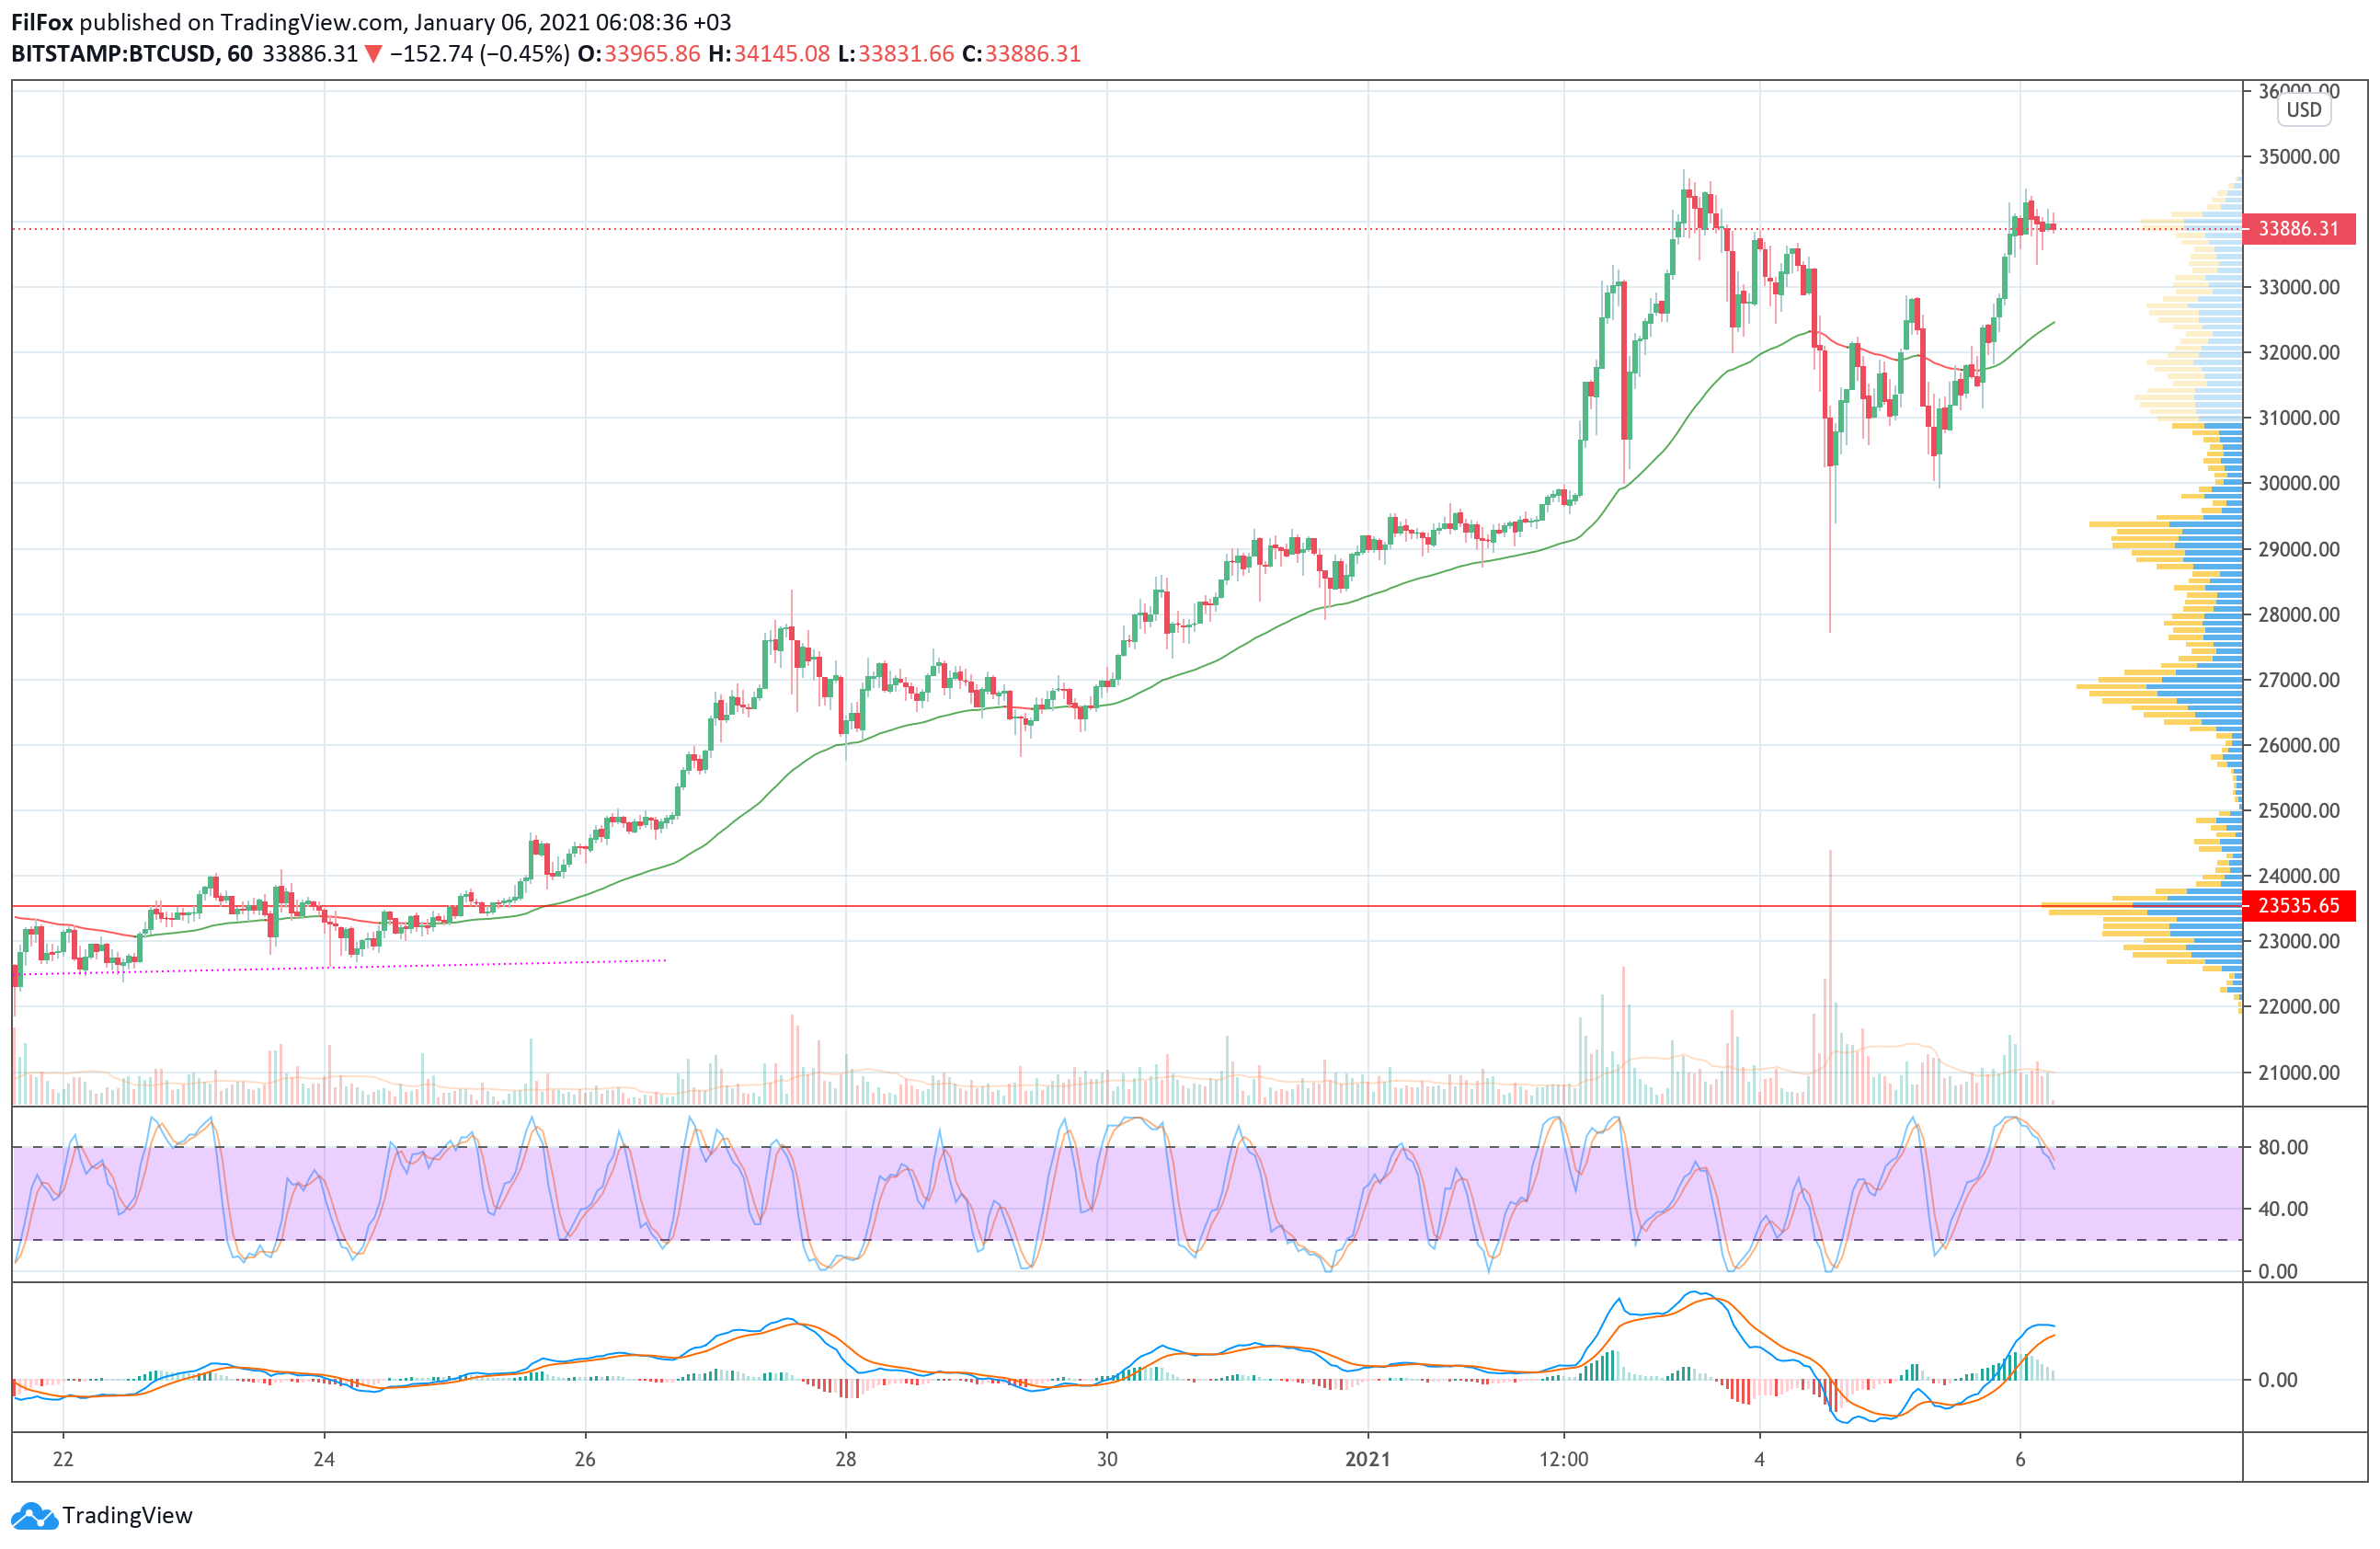 Analysis of prices for Bitcoin, Ethereum, Ripple for 01/06/2021